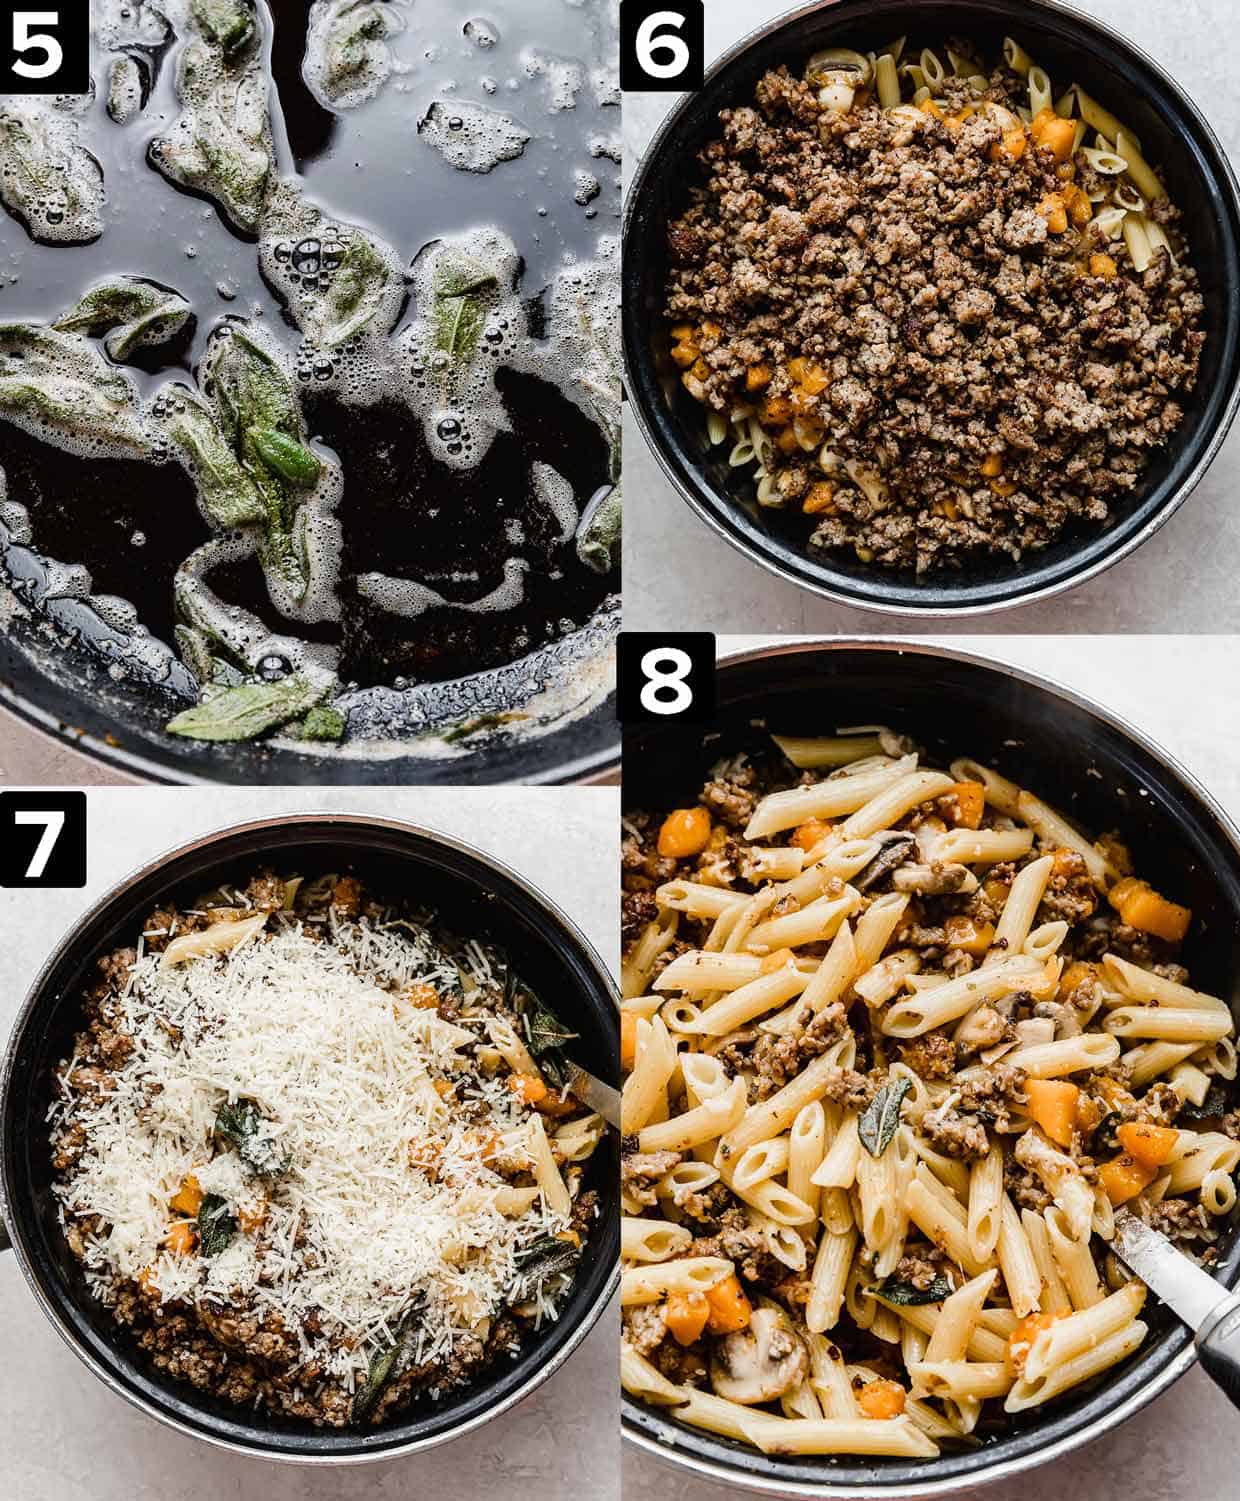 Four images: from top left to bottom right, sage leave in butter, Butternut Squash Mushroom Pasta in a bowl, Butternut Squash Mushroom Pasta topped with parmesan cheese, and Butternut Squash Mushroom Pasta stirred together.